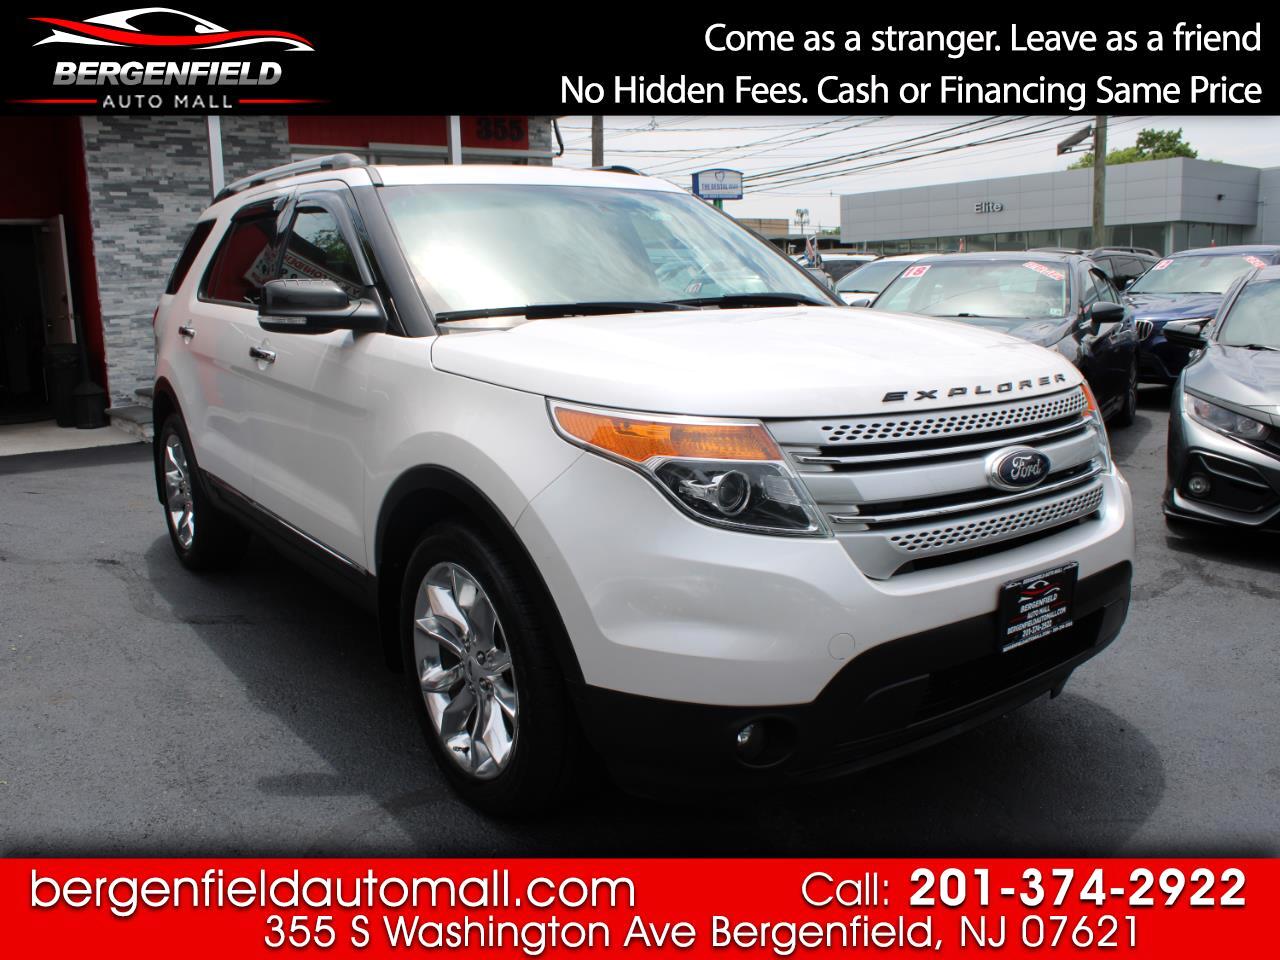 Used Ford Explorer Bergenfield Nj